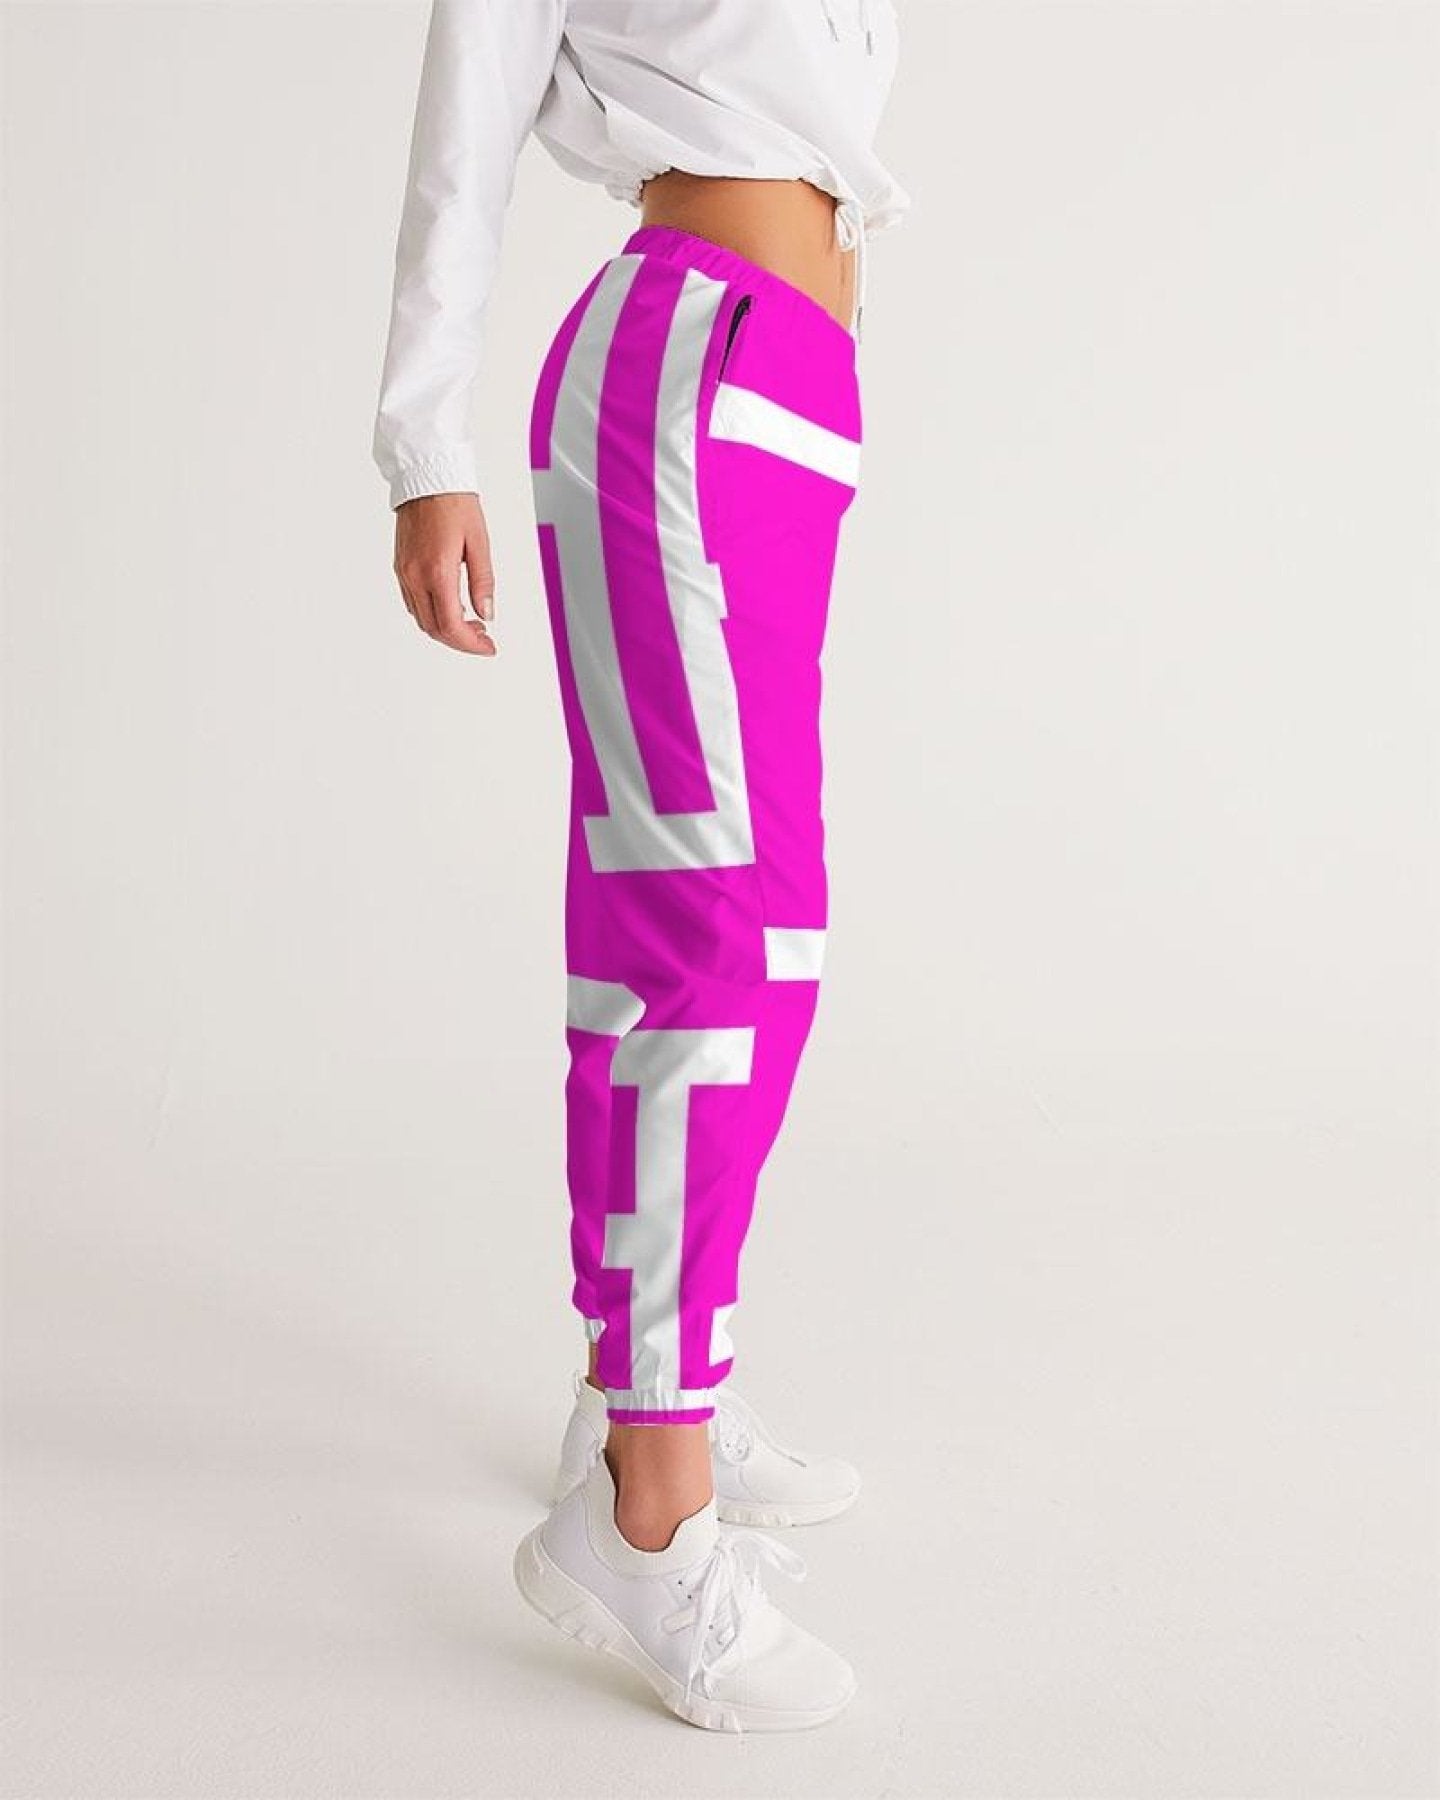 Pink Track Pants' - Track pants in the color pink, providing a stylish and comfortable option for your athletic or casual attire.